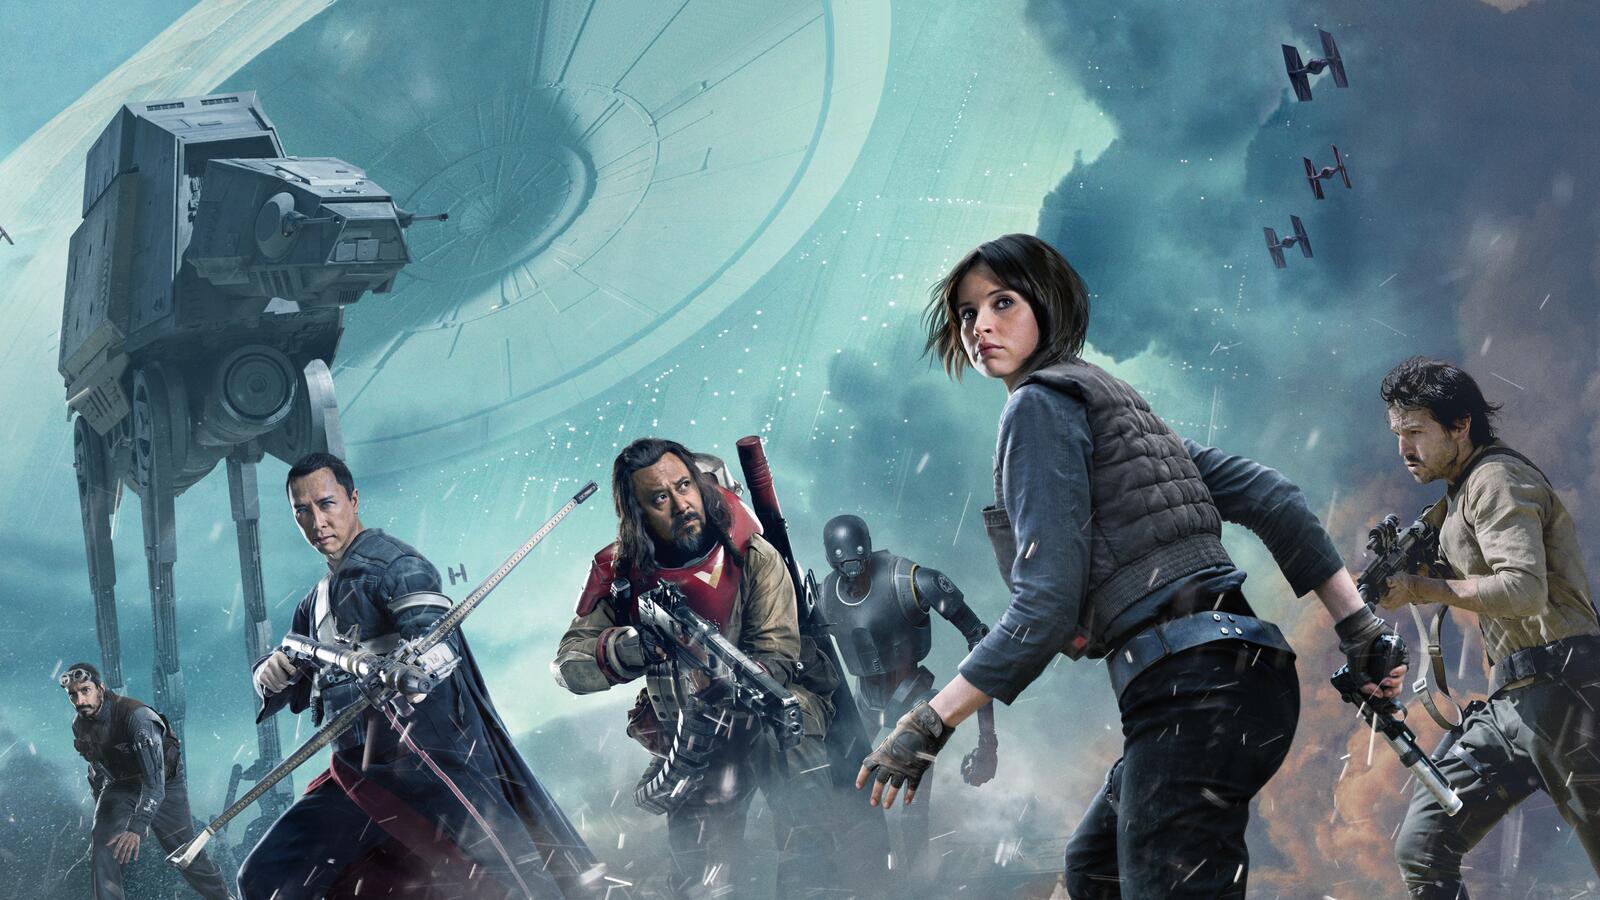 Wallpapers rogue one a star wars story movies star wars on the desktop